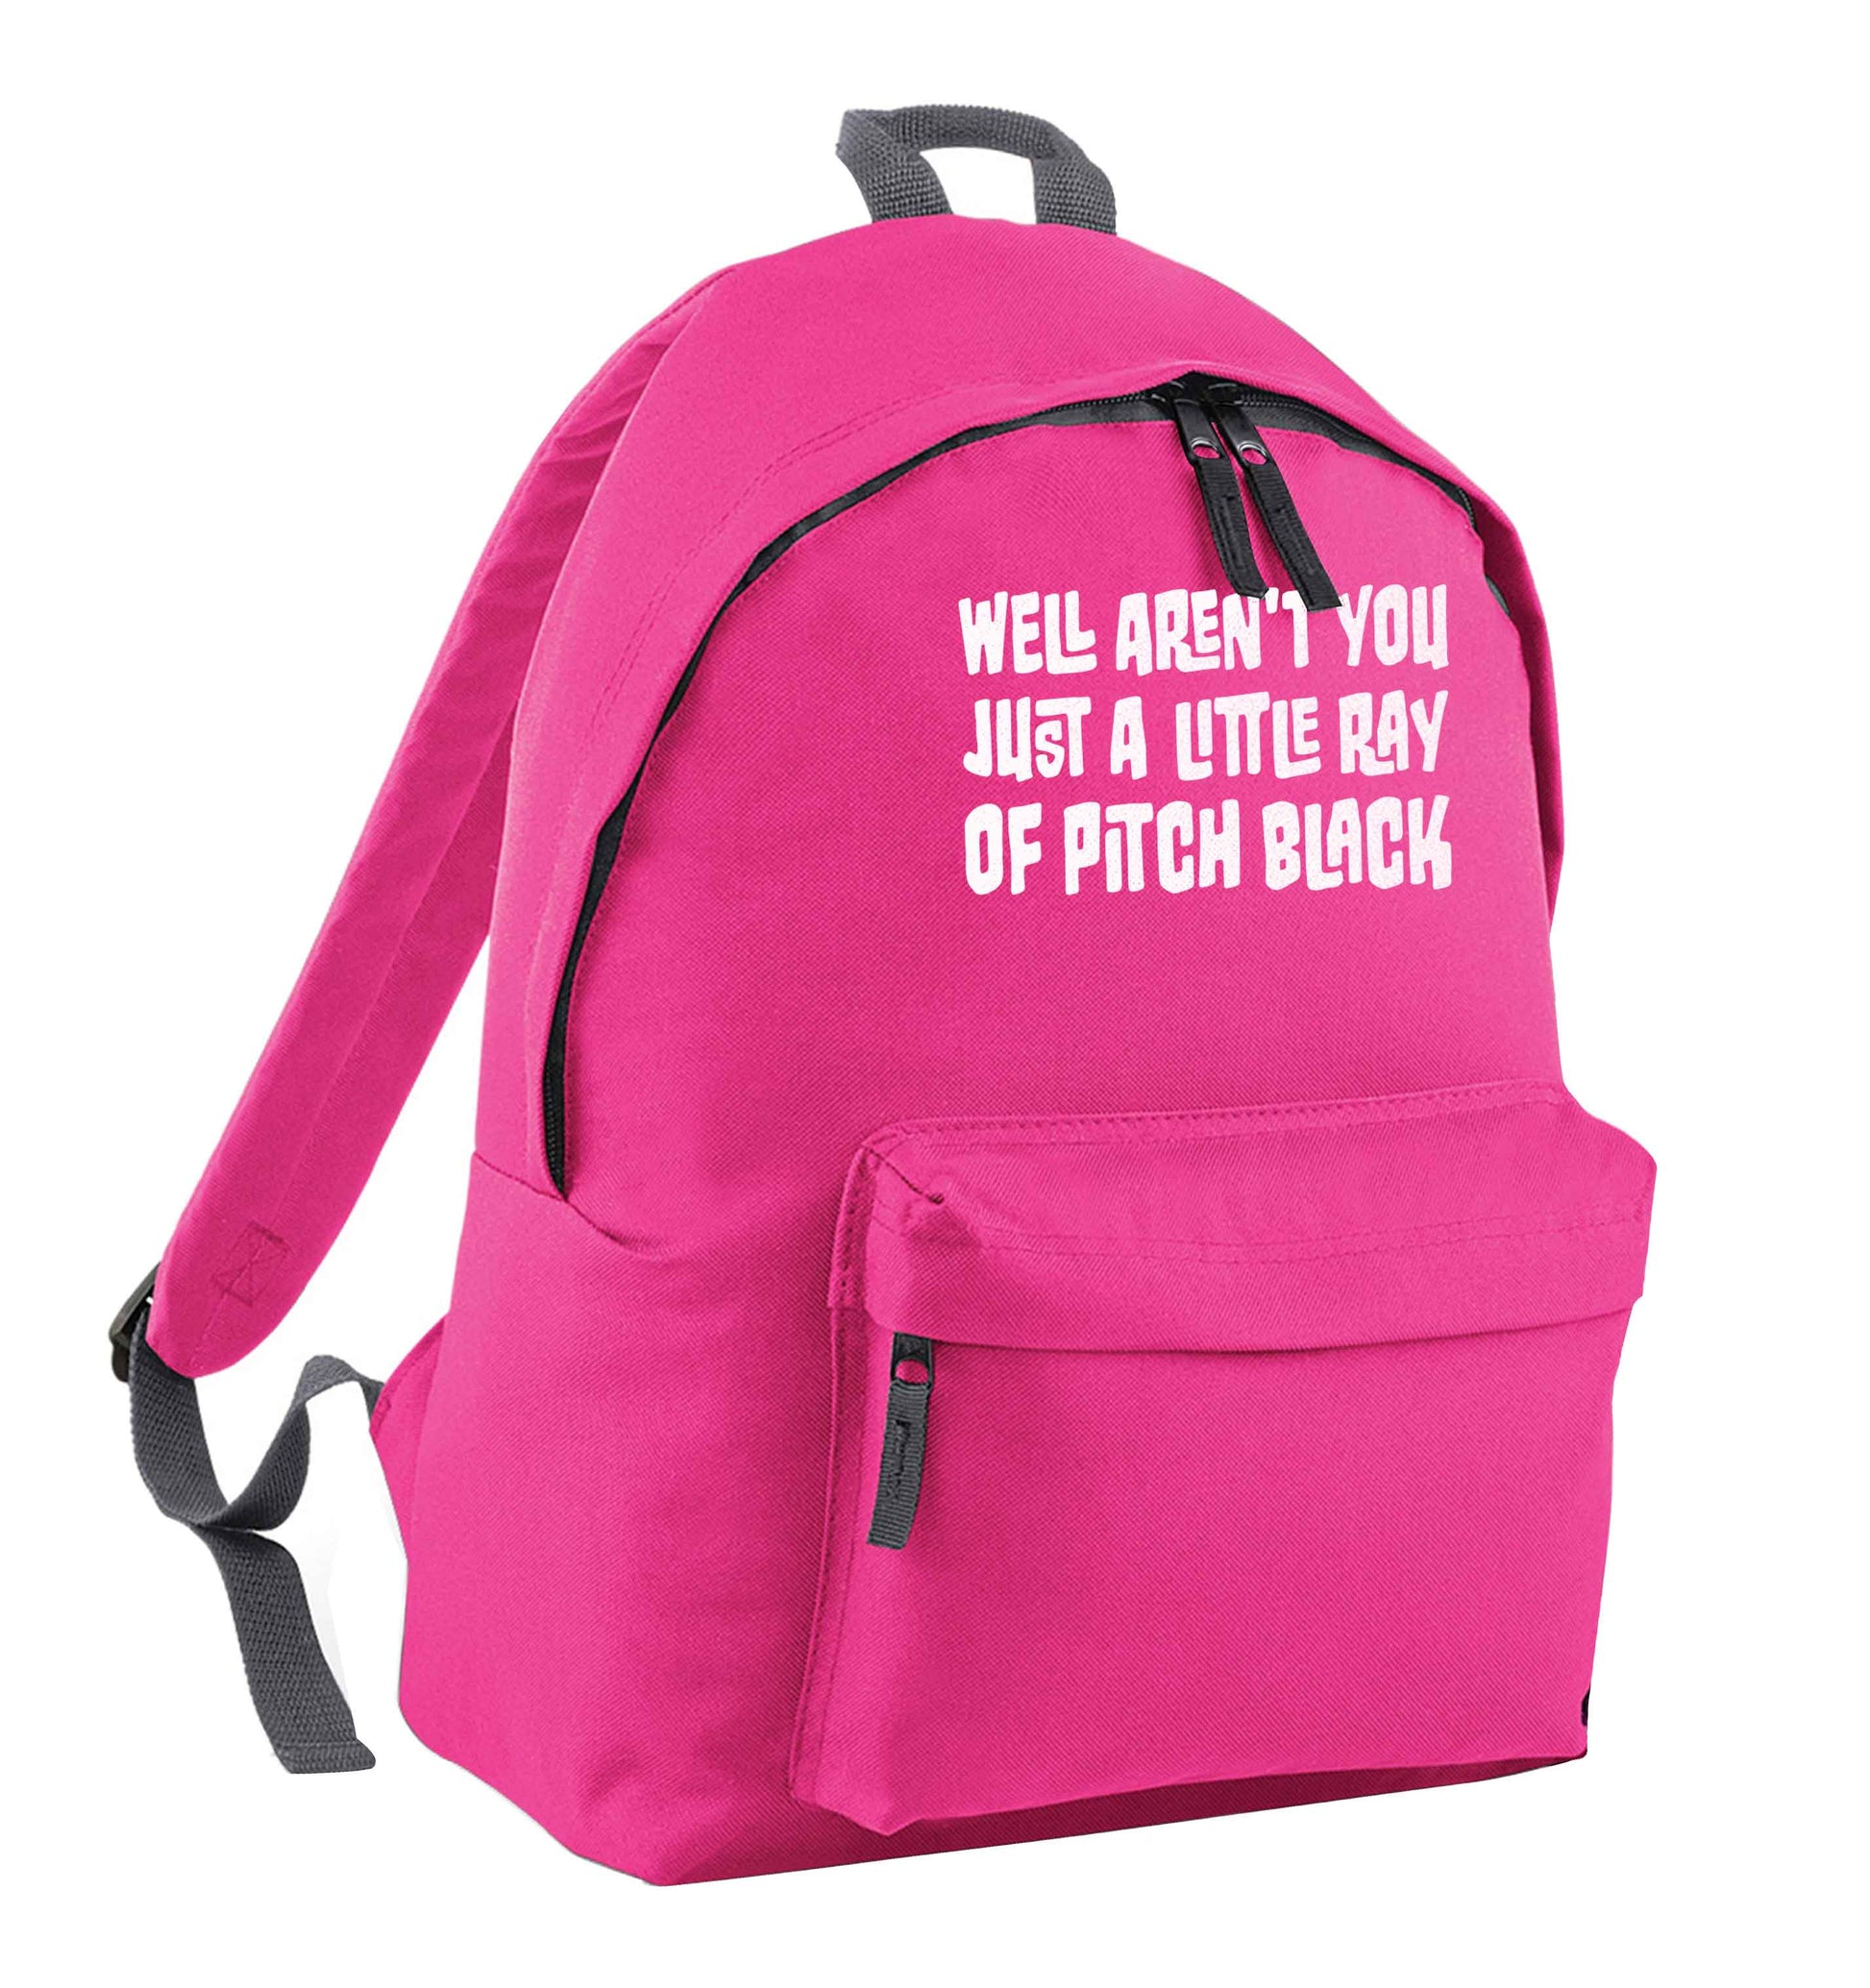 Well aren't you just a little ray of pitch black Kit pink children's backpack